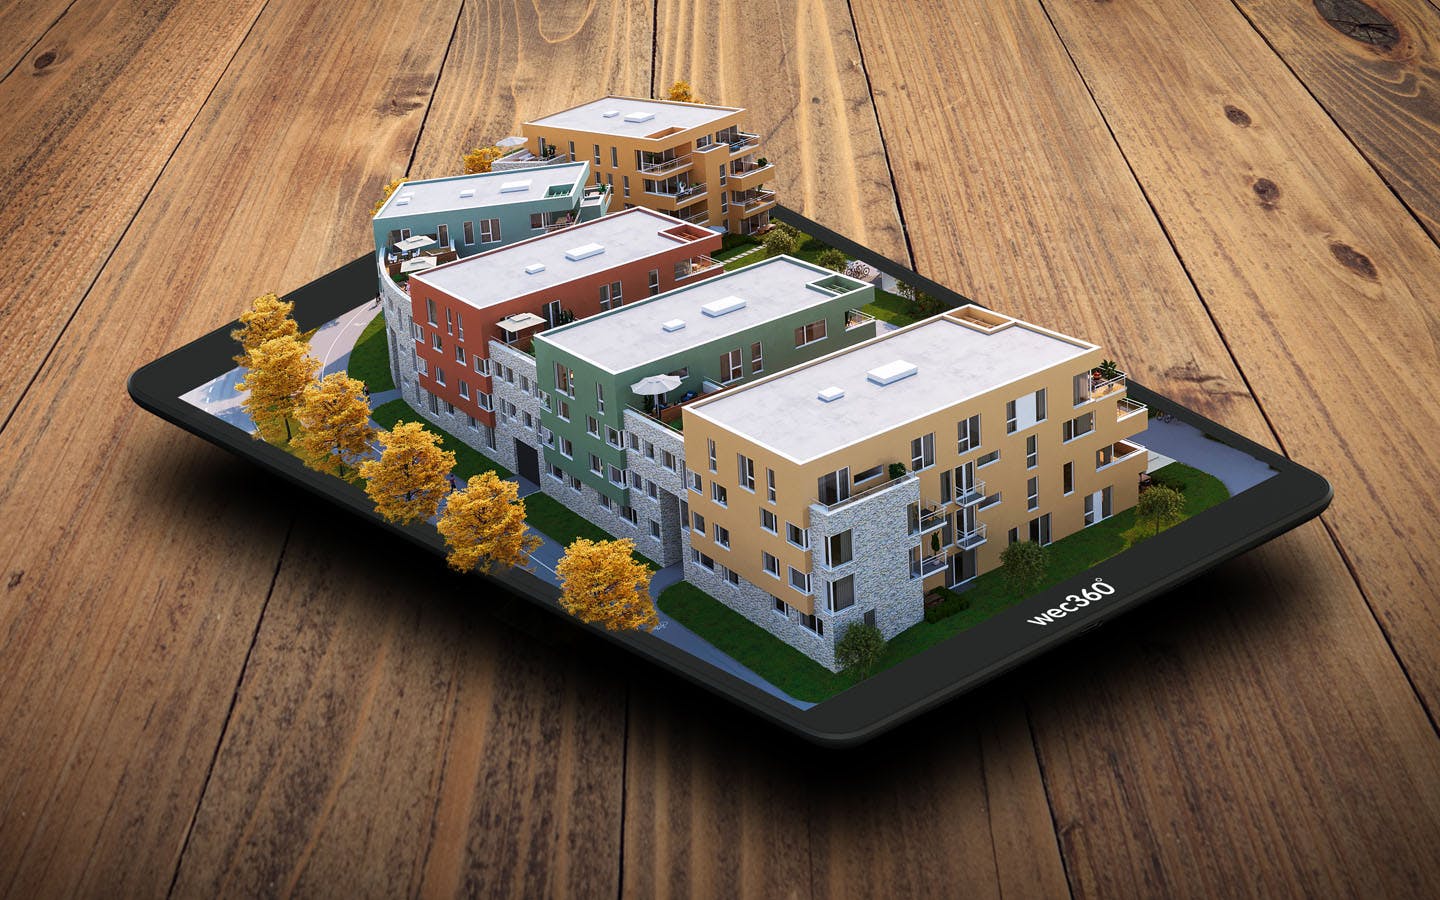 An ipad with a 3D model of a house